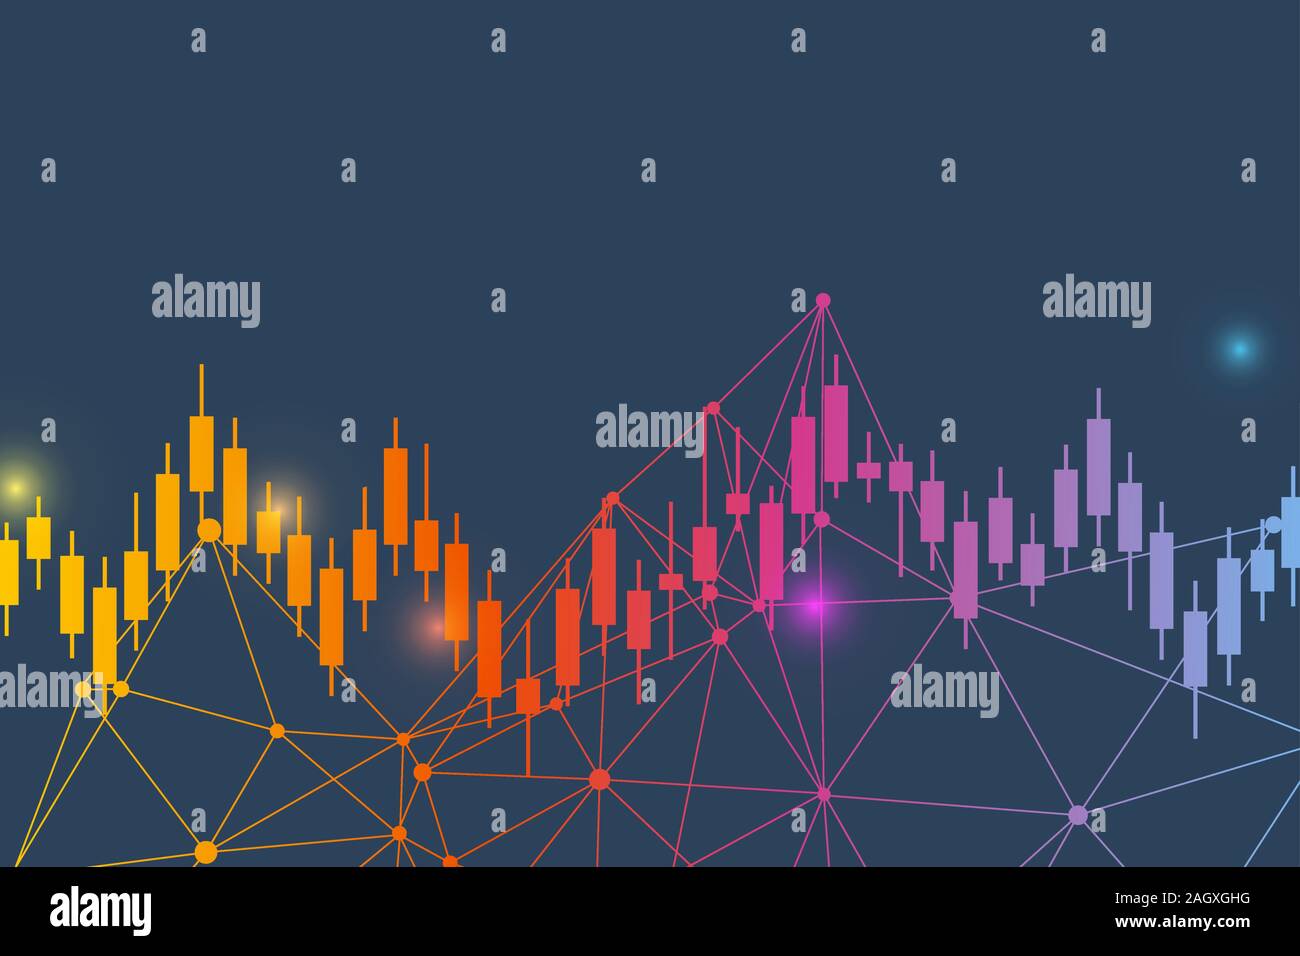 Stock market or forex trading graph. Chart in financial market vector illustration Abstract finance background. Stock Vector